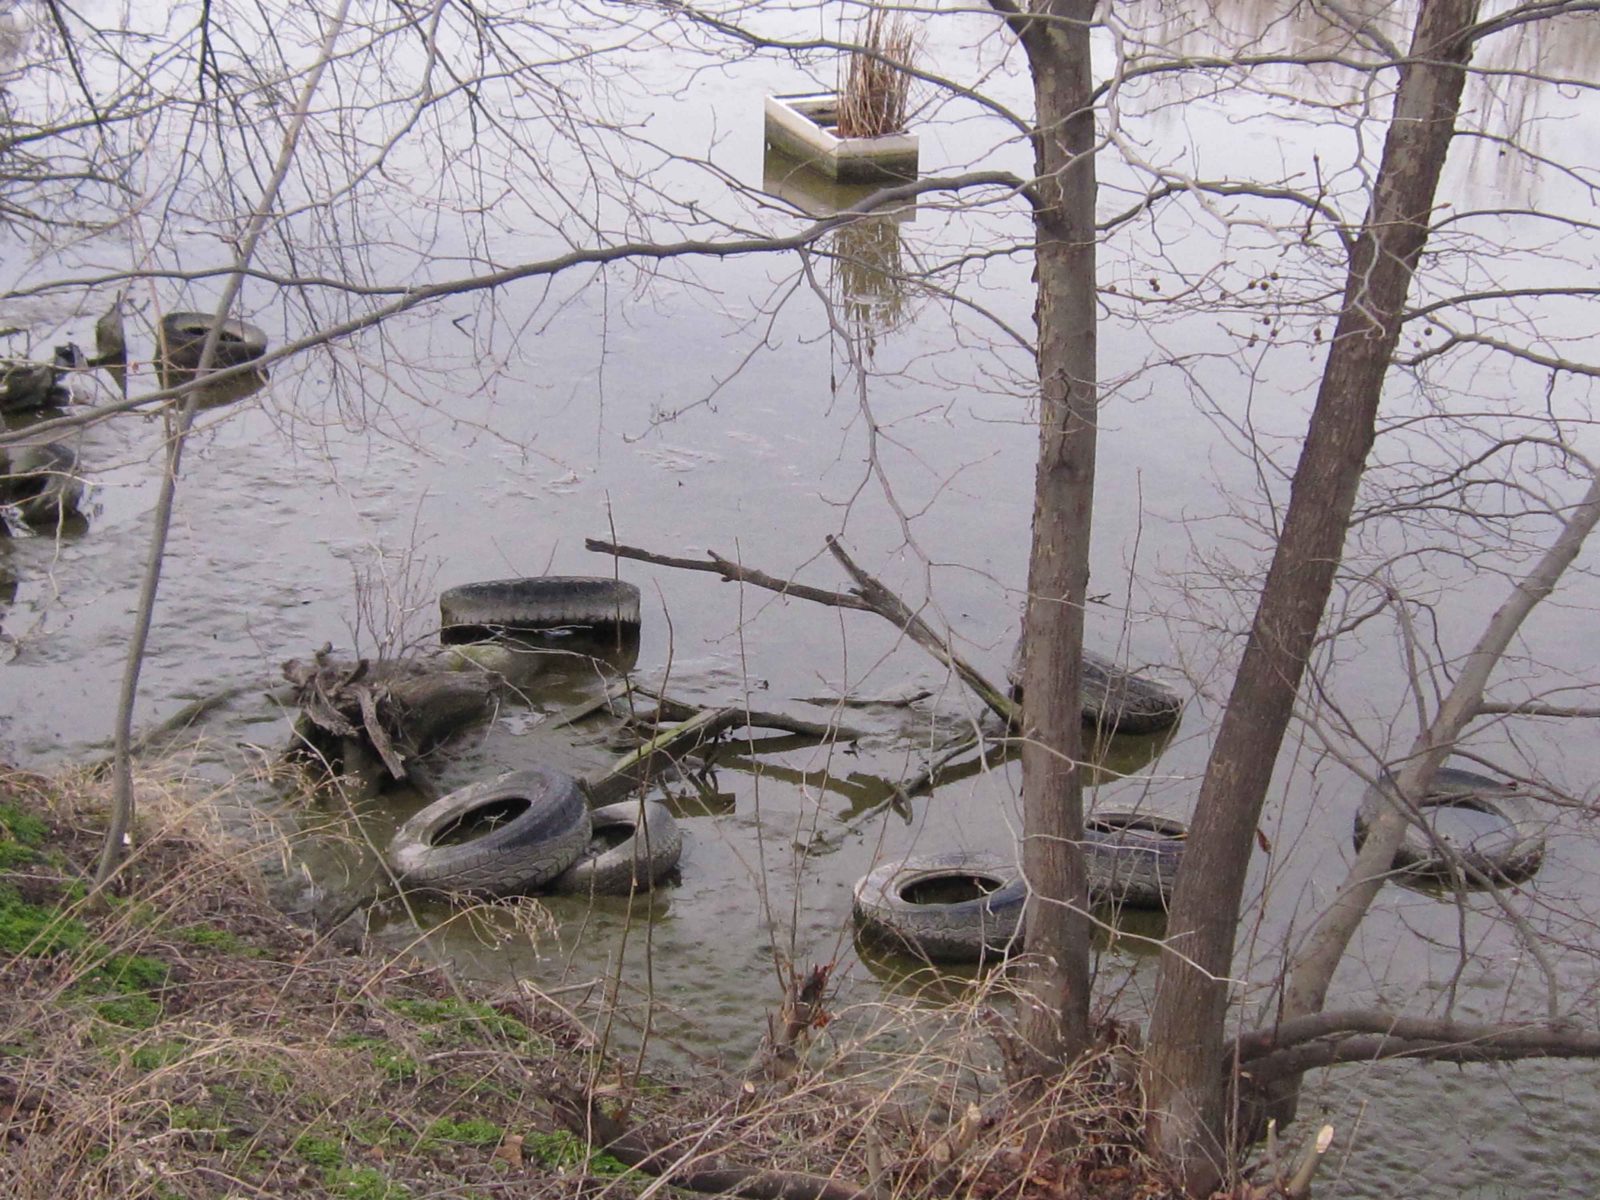 Discarded tires and debris in the pond before clean-up work begins.